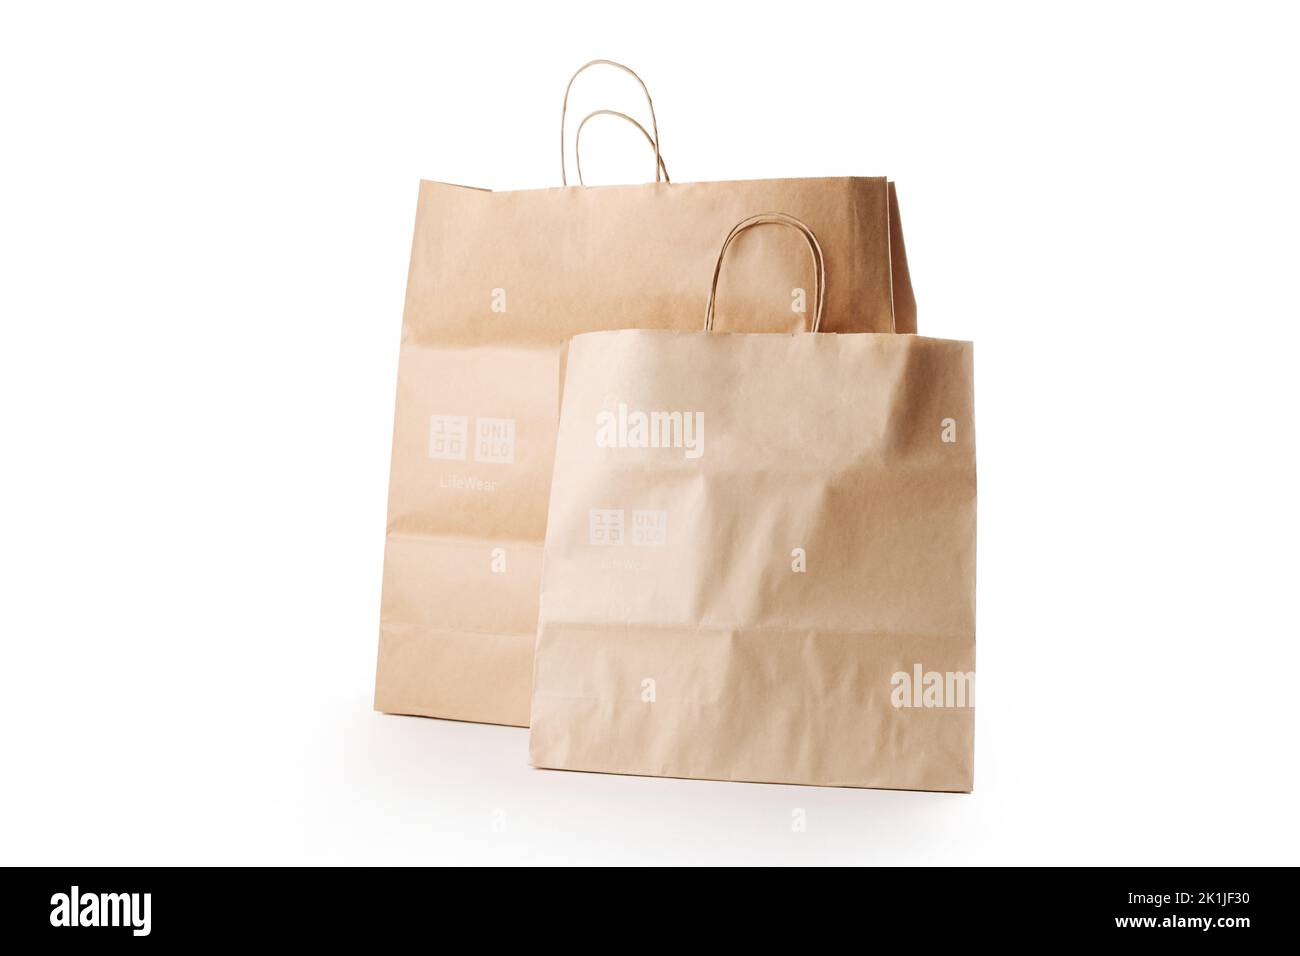 Cyprus, Paphos - SEPTEMBER 08, 2022: Pair of Uniqlo paper bag from Japanese casual clothes brand. Over white background. Stock Photo